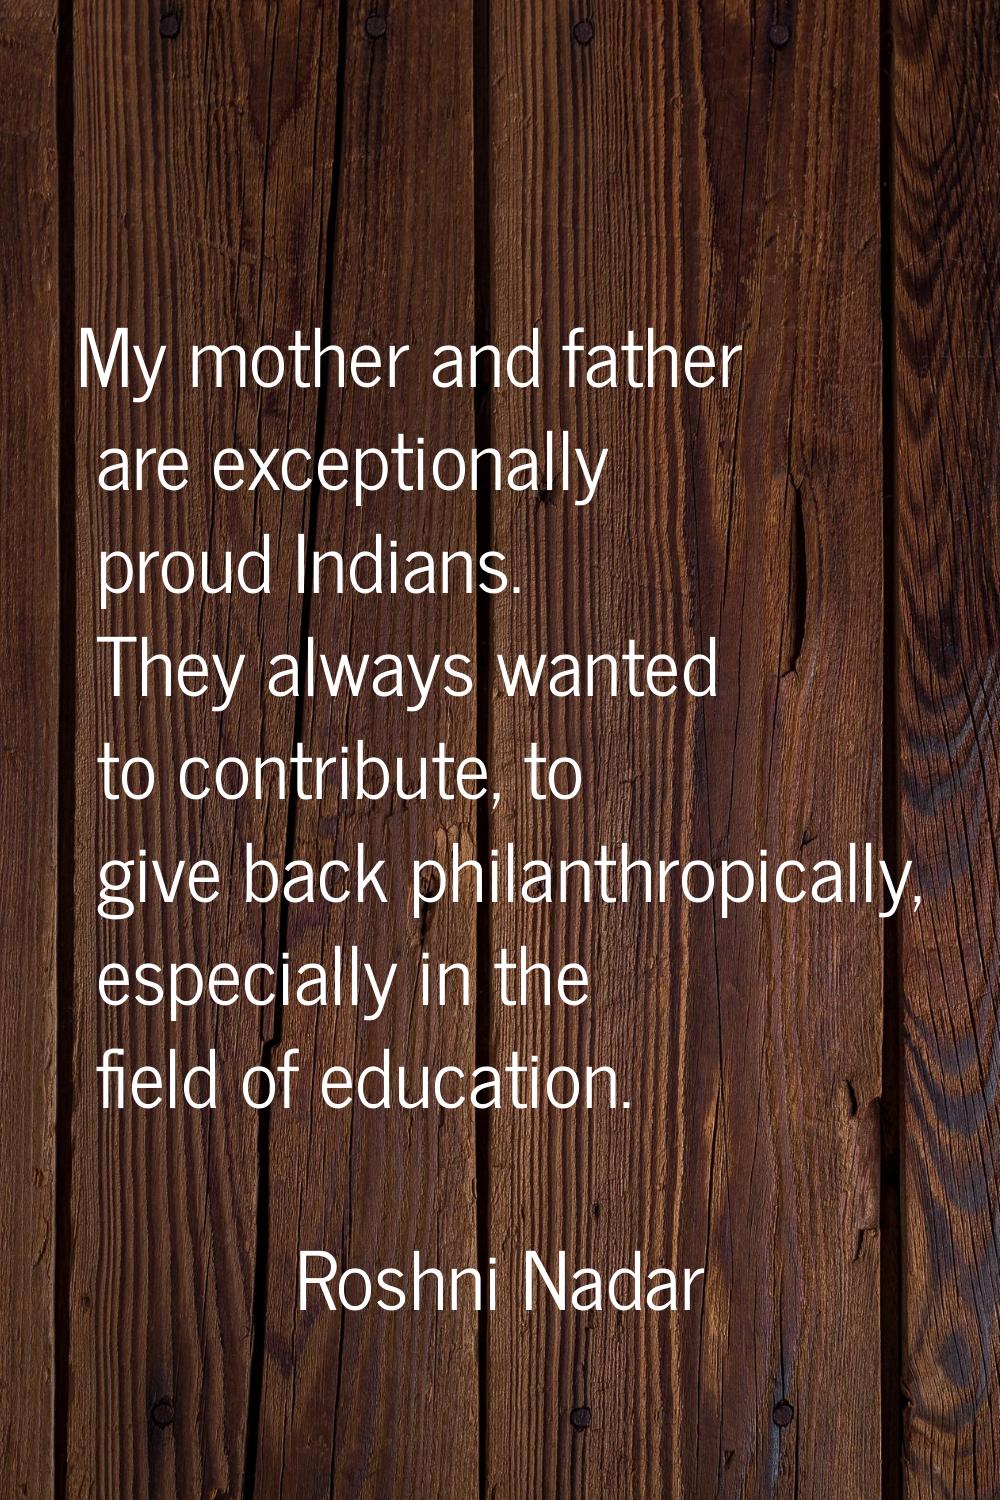 My mother and father are exceptionally proud Indians. They always wanted to contribute, to give bac